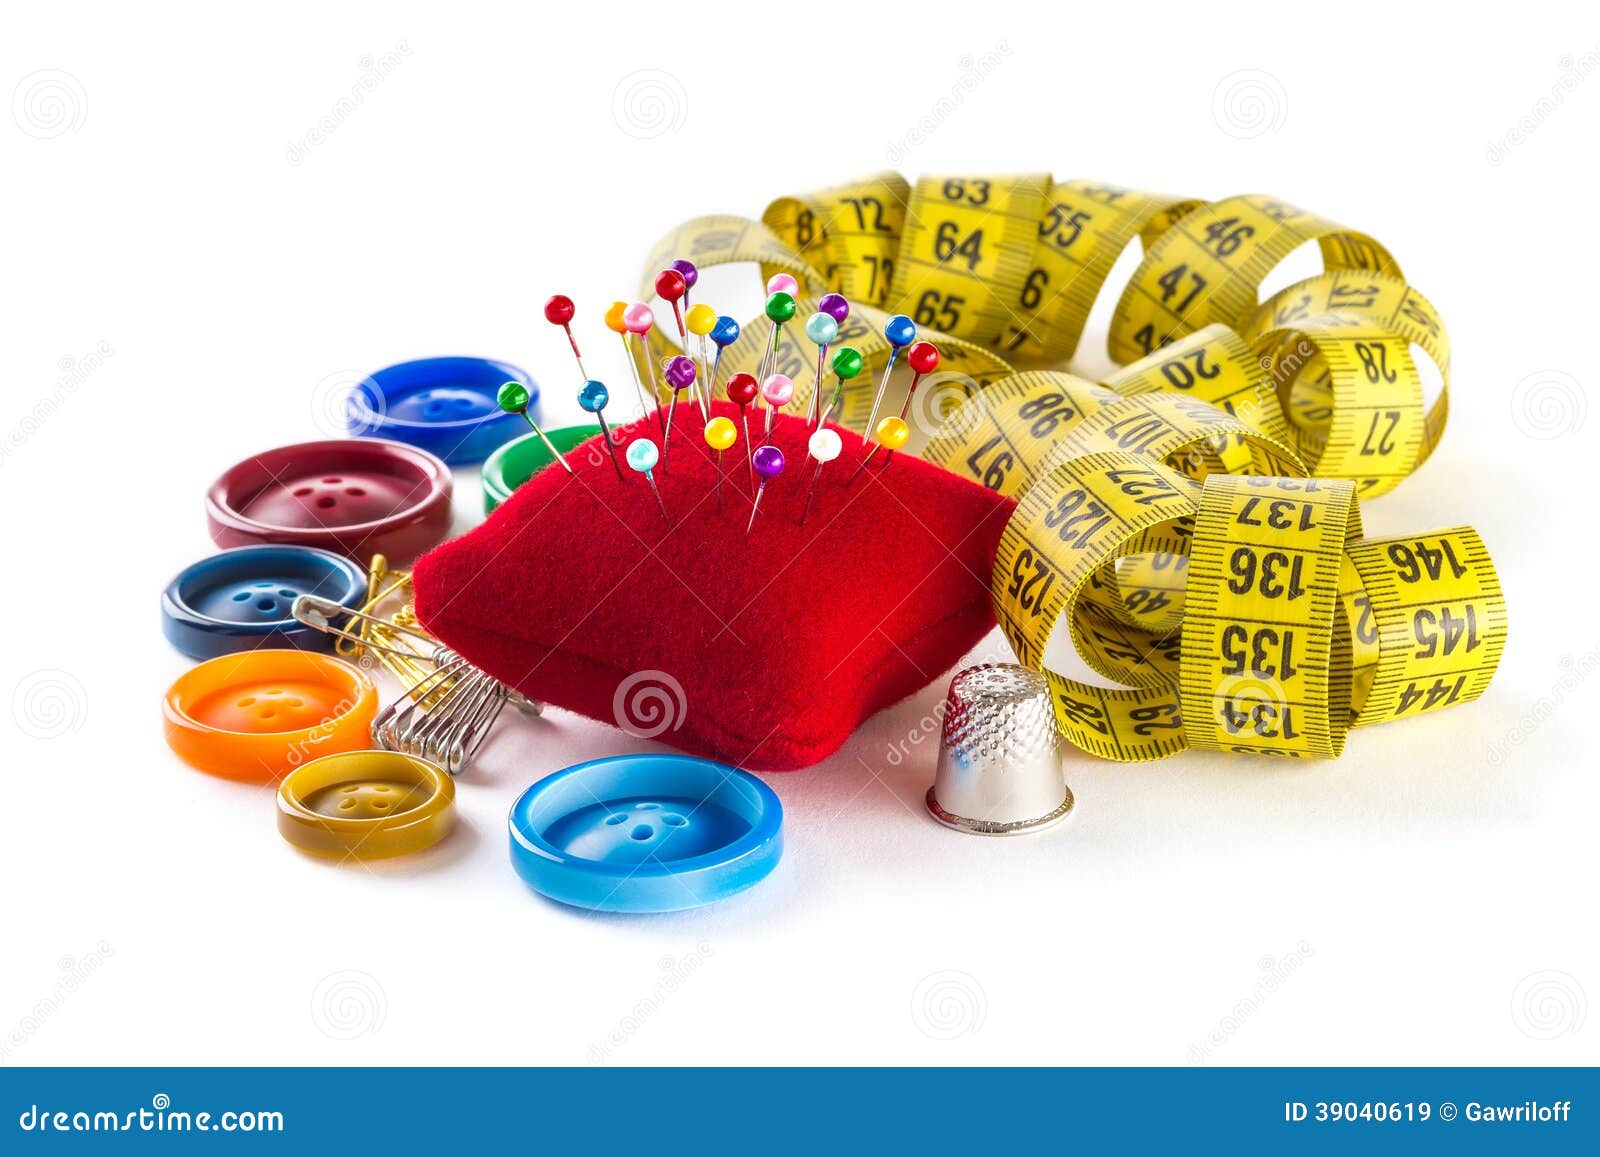 Button Sewing Tool Stock Photo 198152276